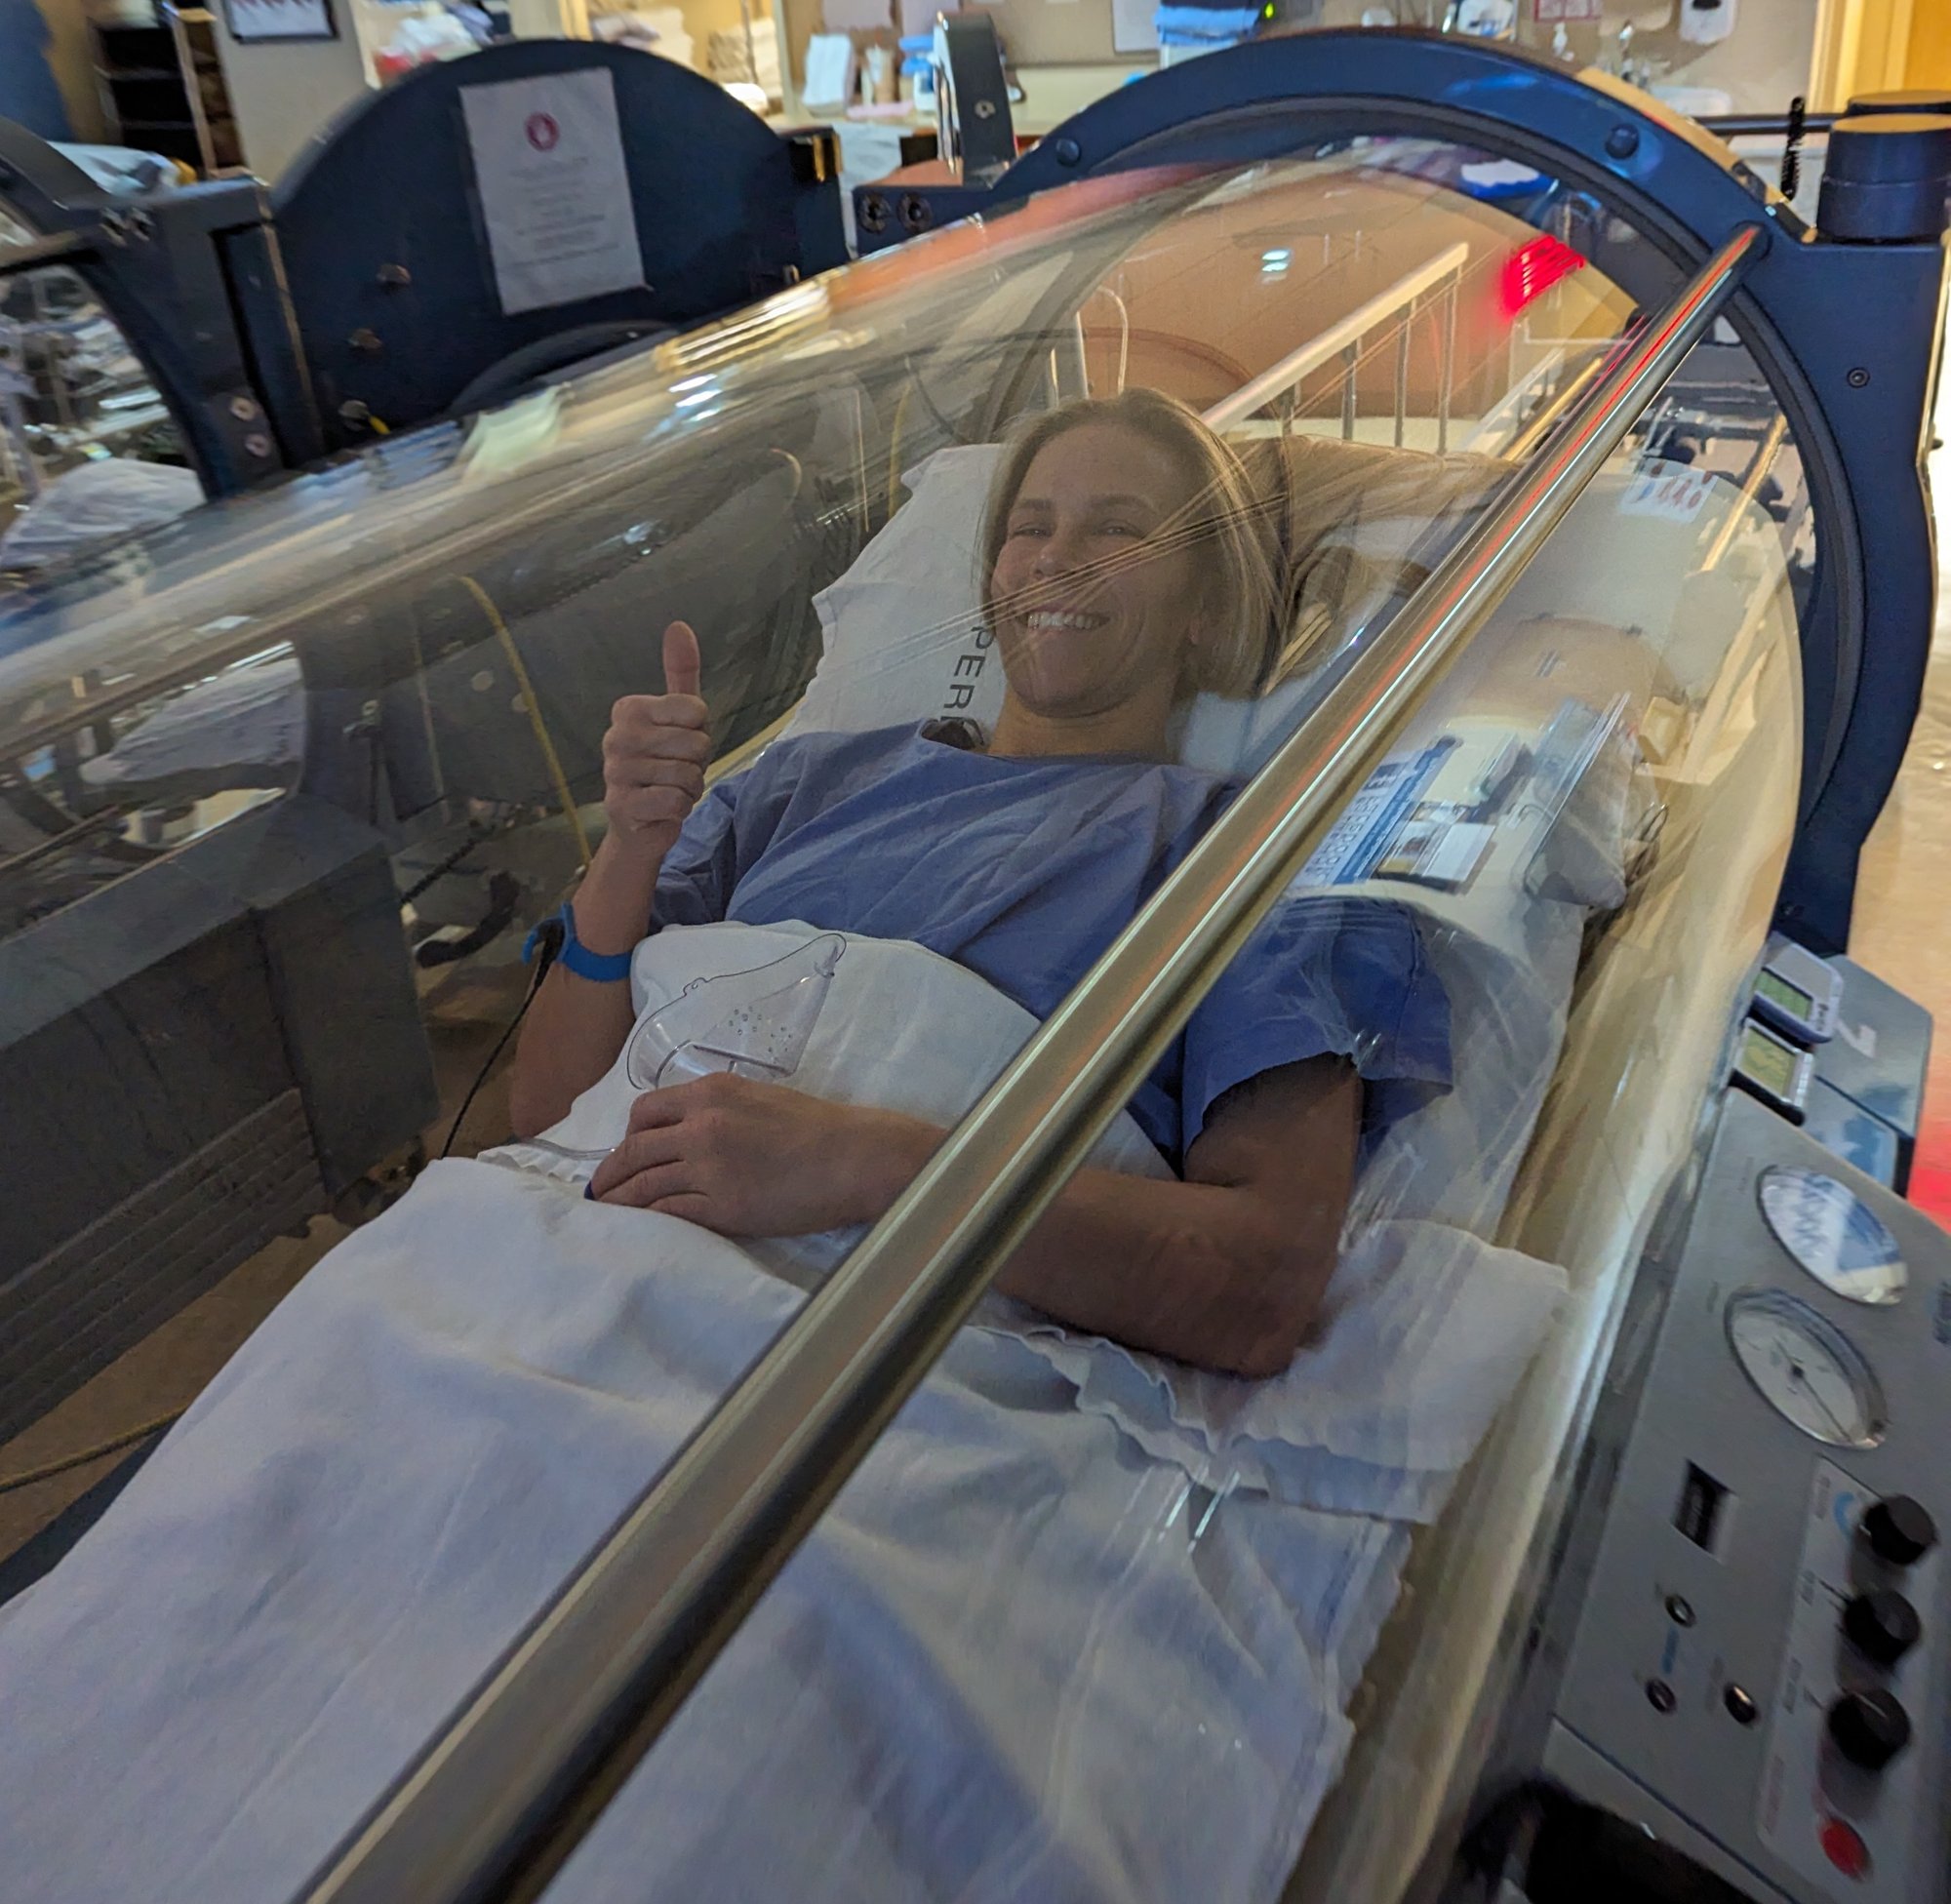 Katlyn Chookagian, UFC Fighter in a Hyperbaric Oxygen Therapy Chamber at Hyperbaric Medical Solutions